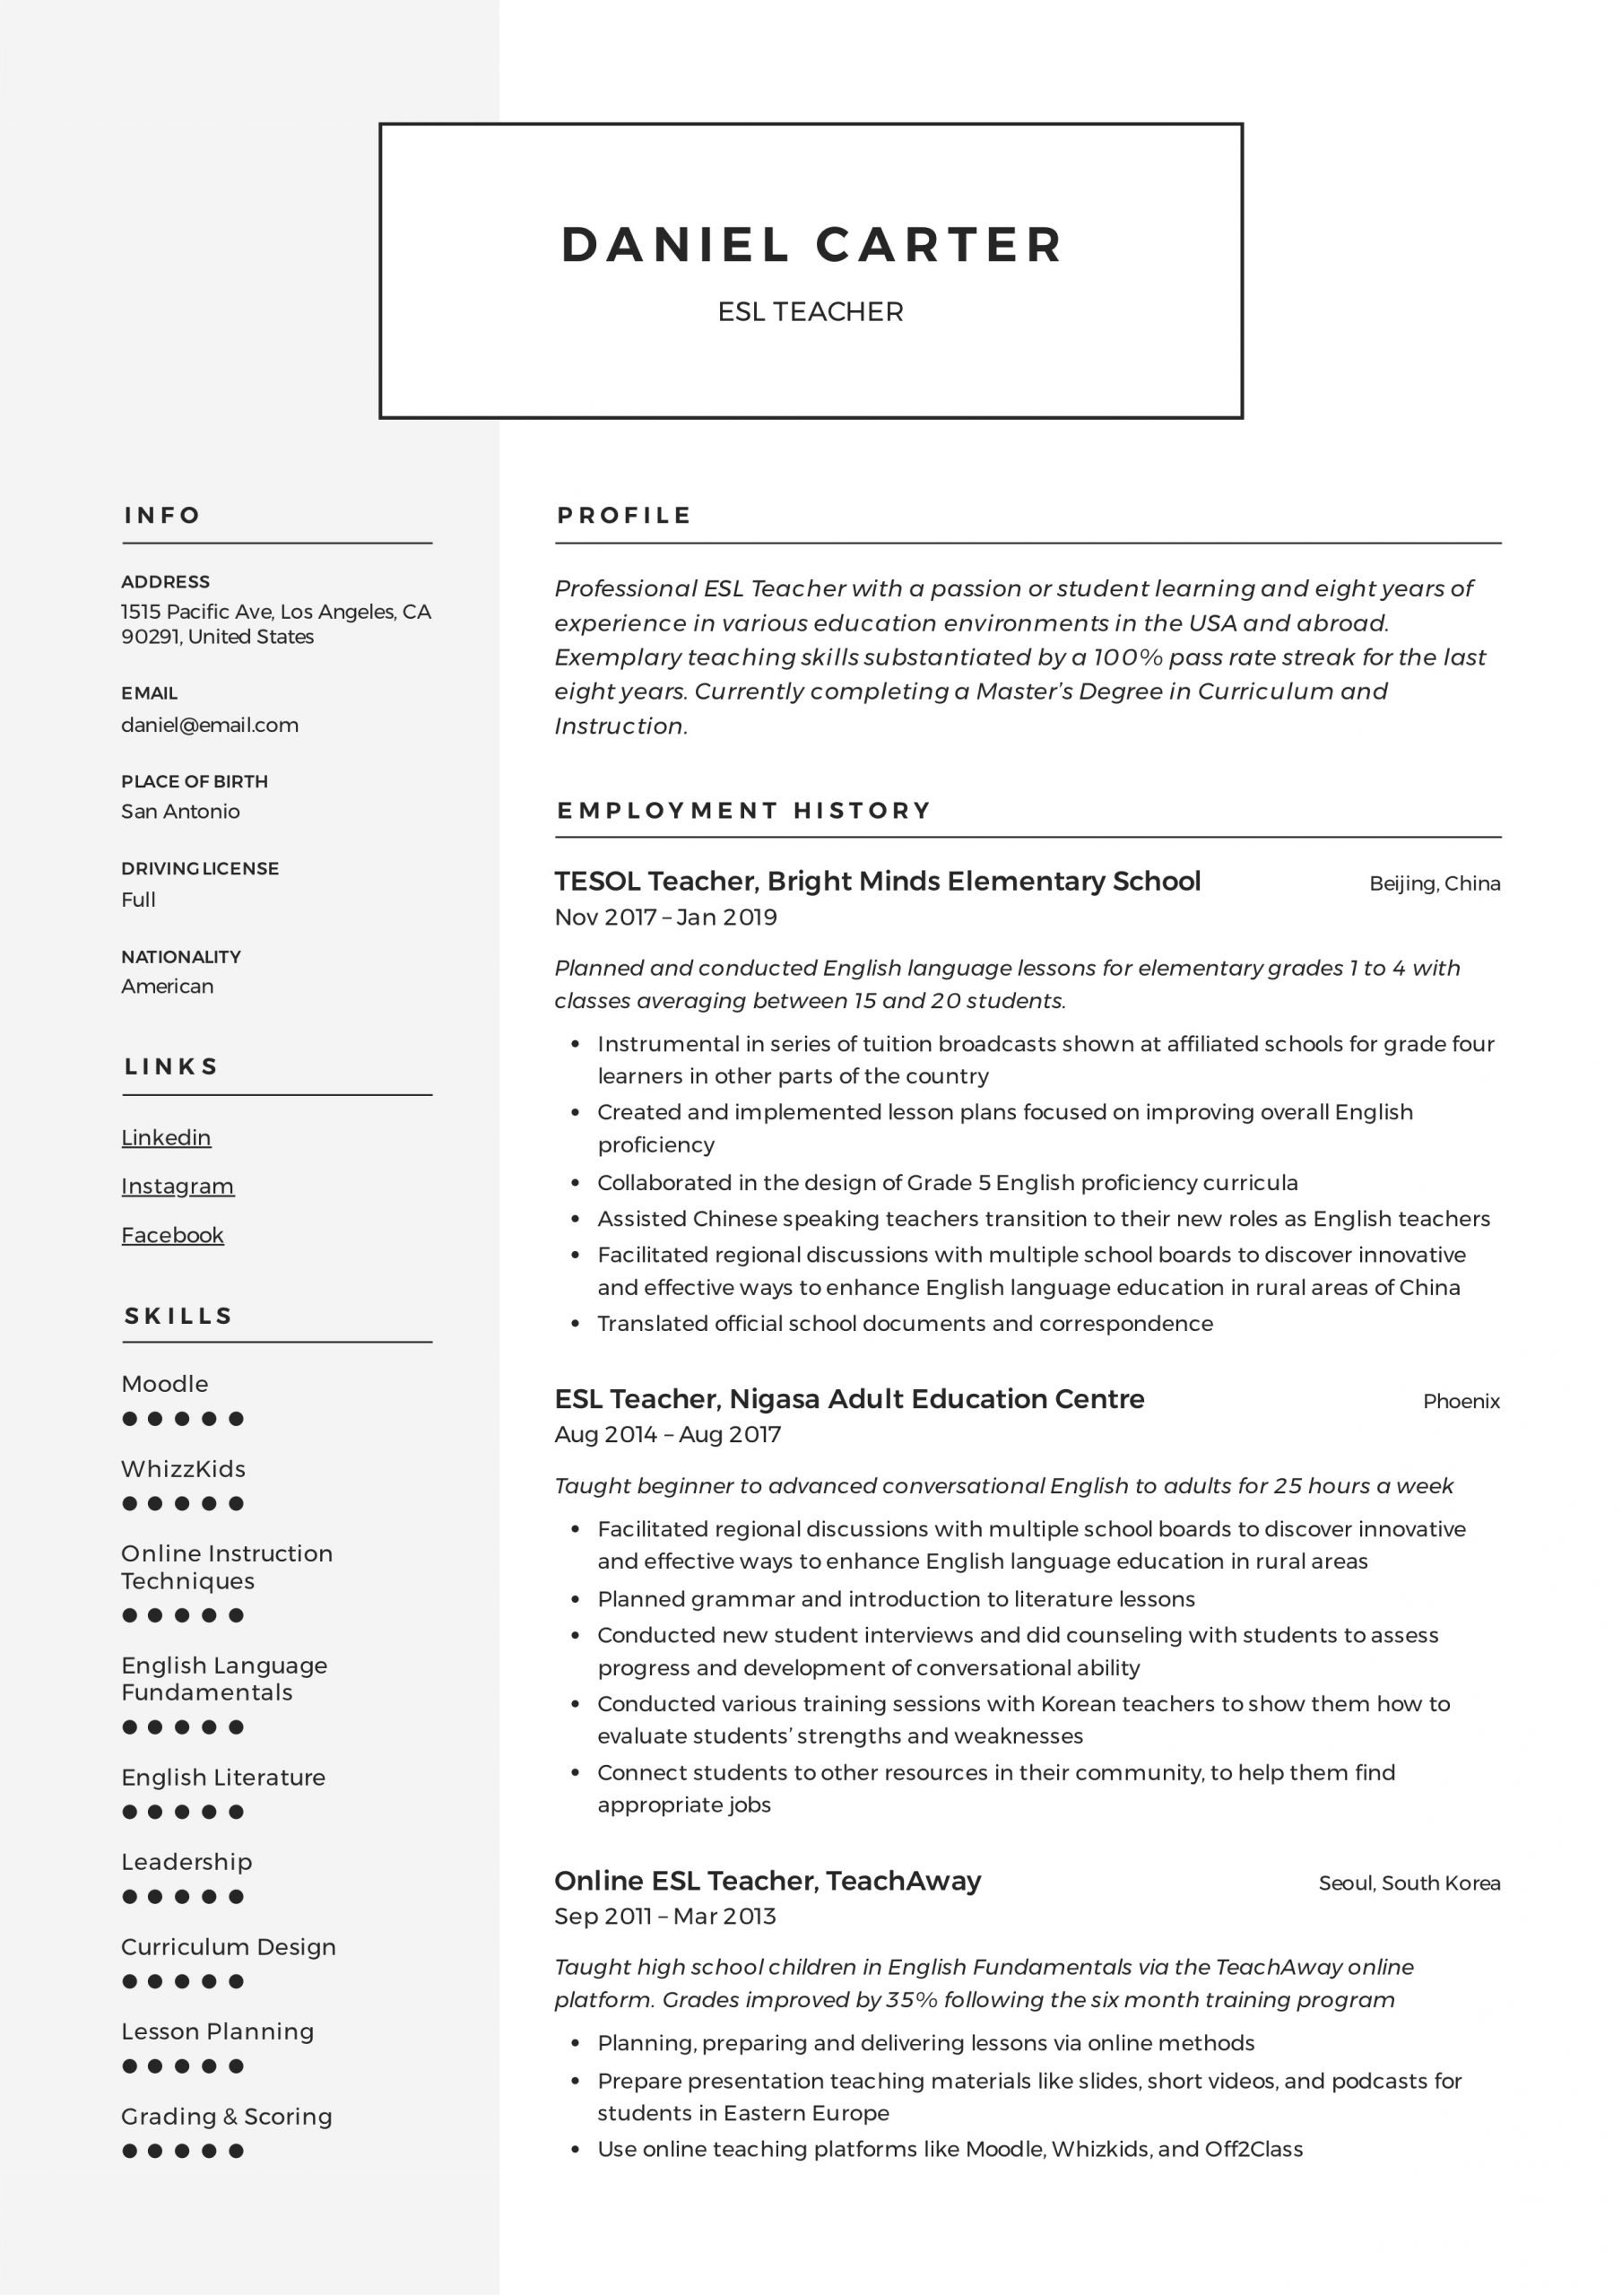 Esl Teacher Resume Writing Guide 12 Free Templates 2020 in measurements 2478 X 3507